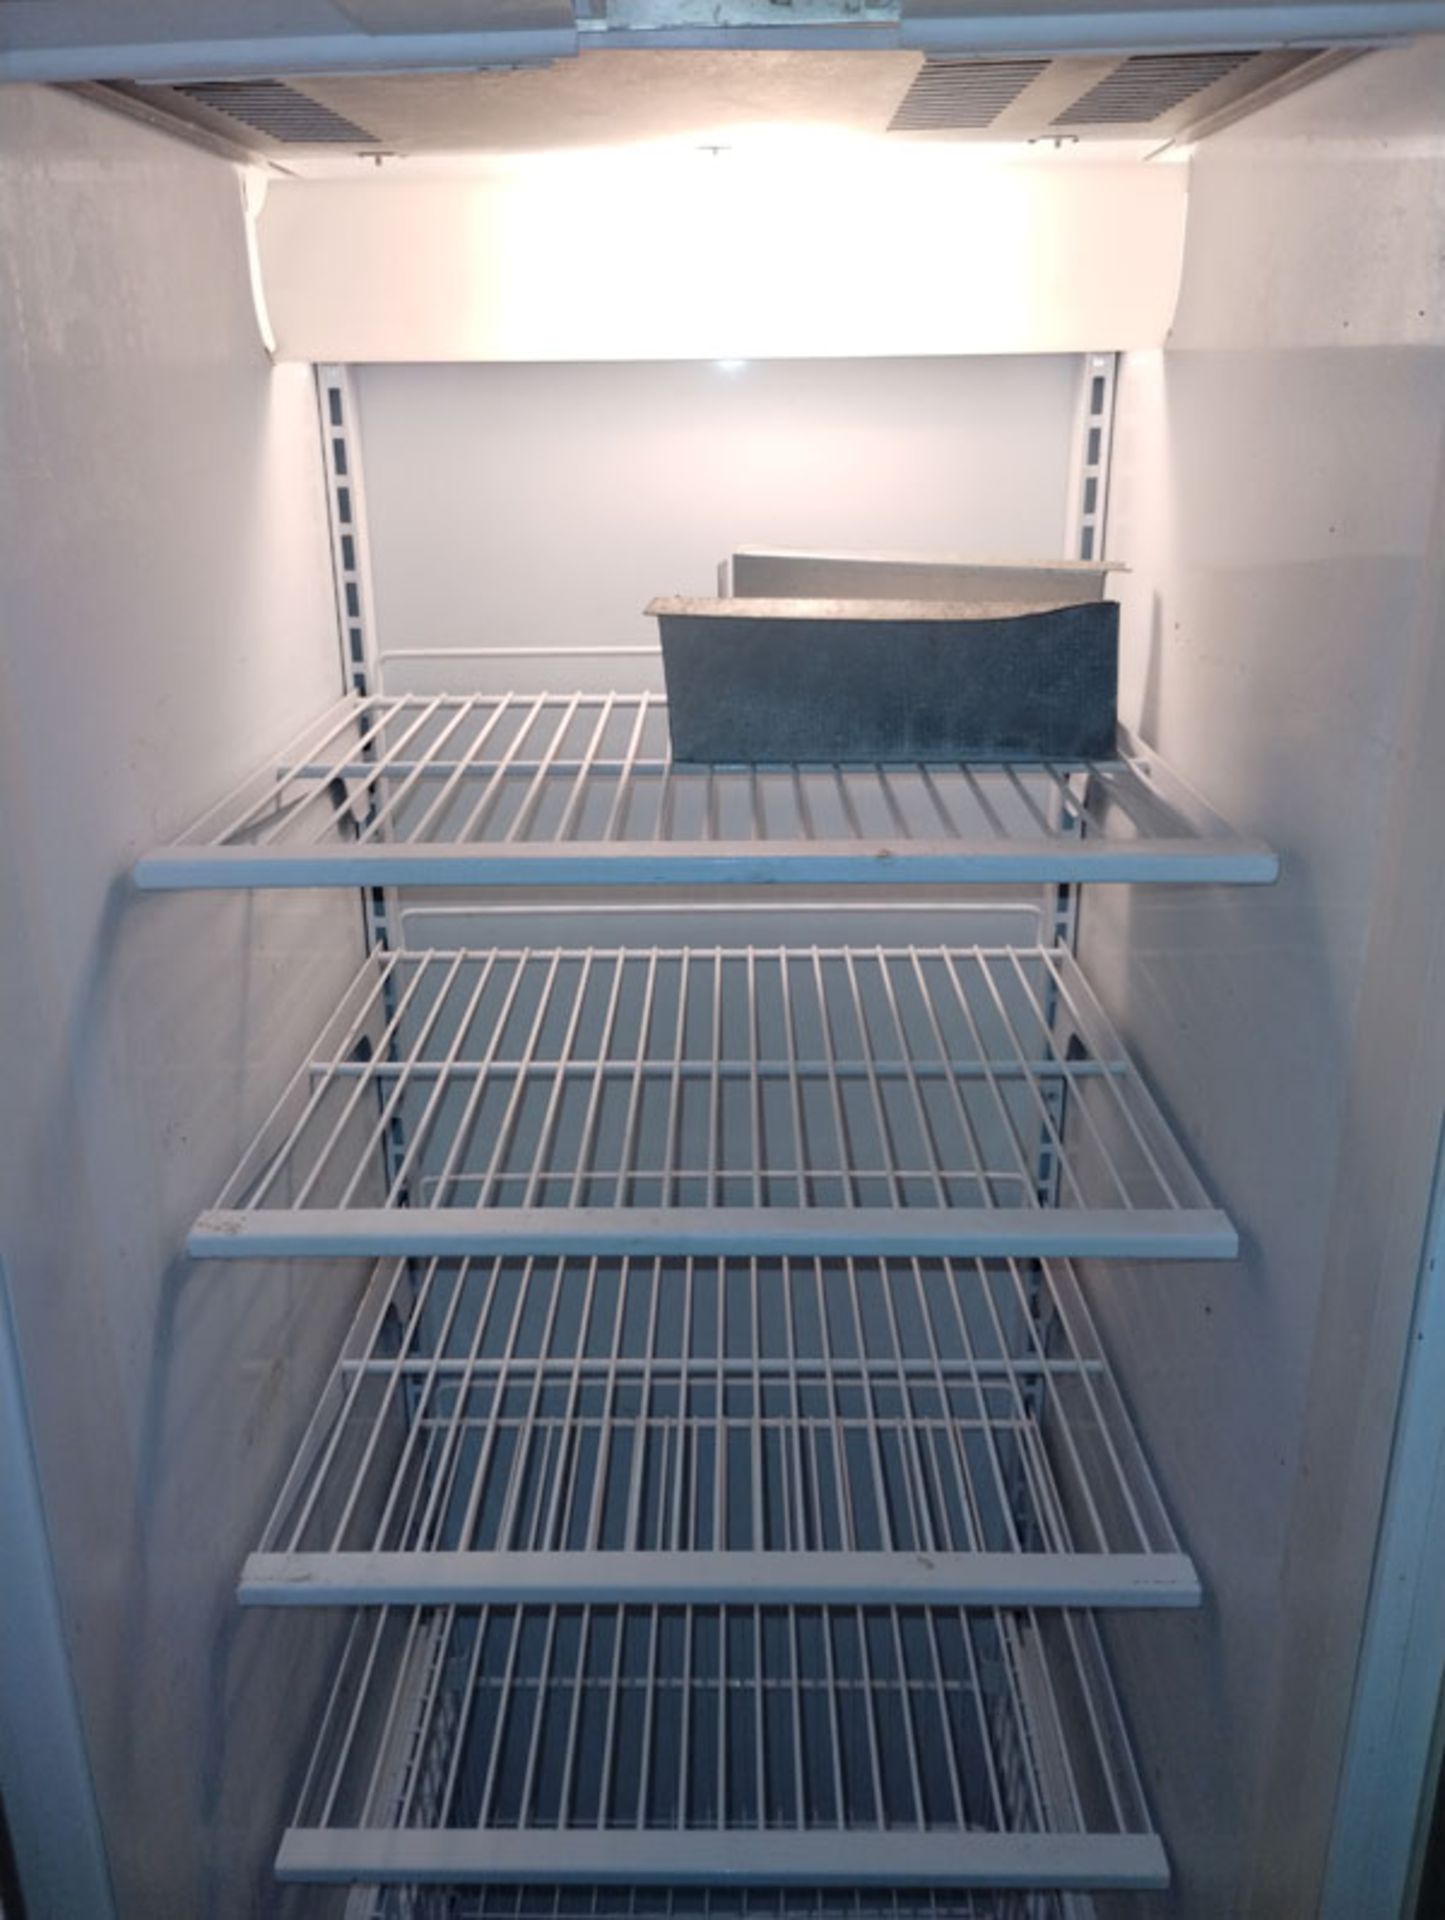 48" GE MONOGRAM Z1SS48DCASS BUILT IN STAINLESS STEEL SIDE BY SIDE REFRIGERATOR. - Image 17 of 19